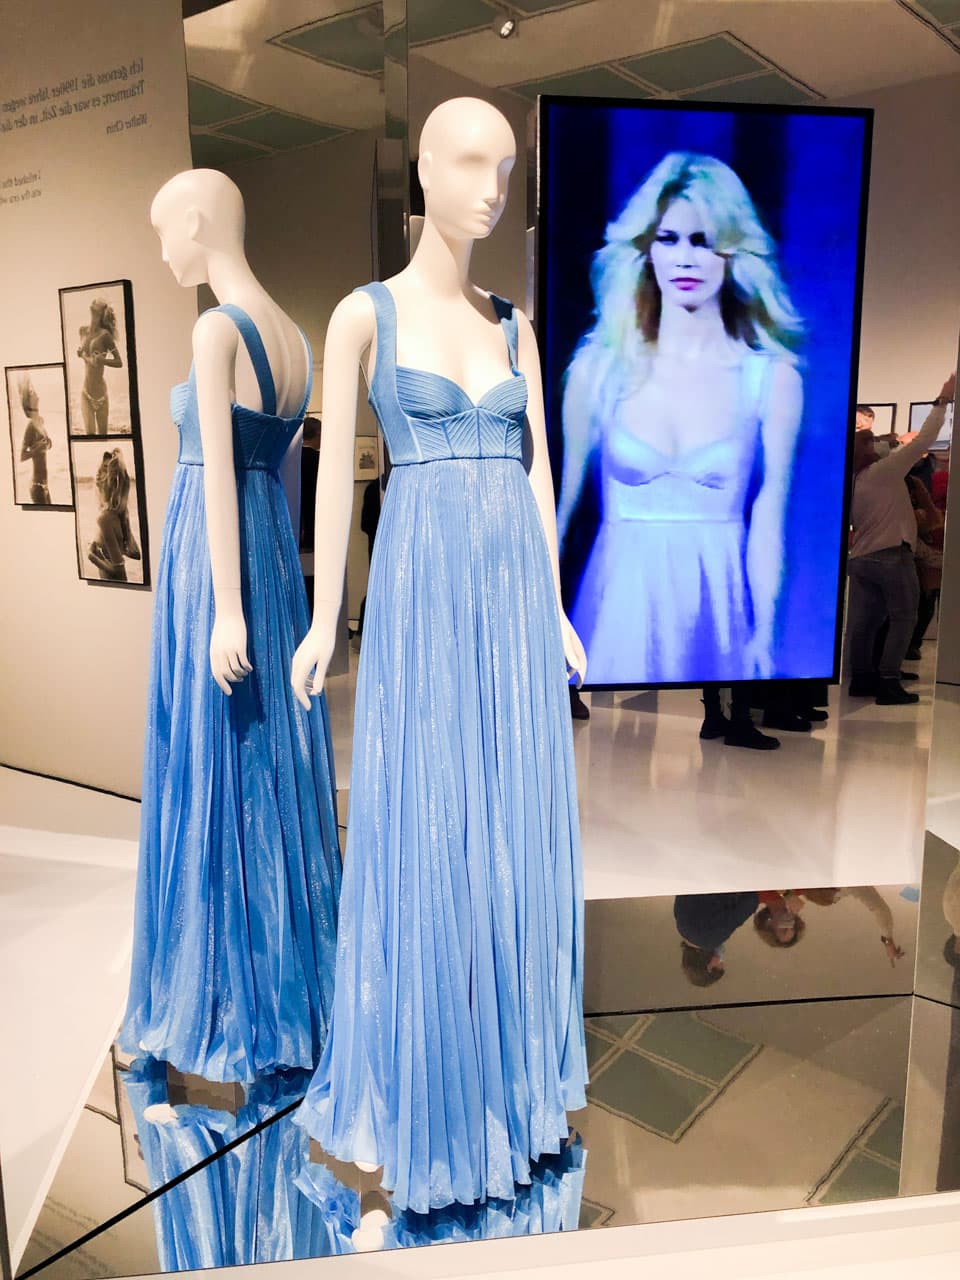 A blue gown worn by Claudia Schiffer at the A/W 1994 Versace show on display at Kunstpalast Museum in Düsseldorf